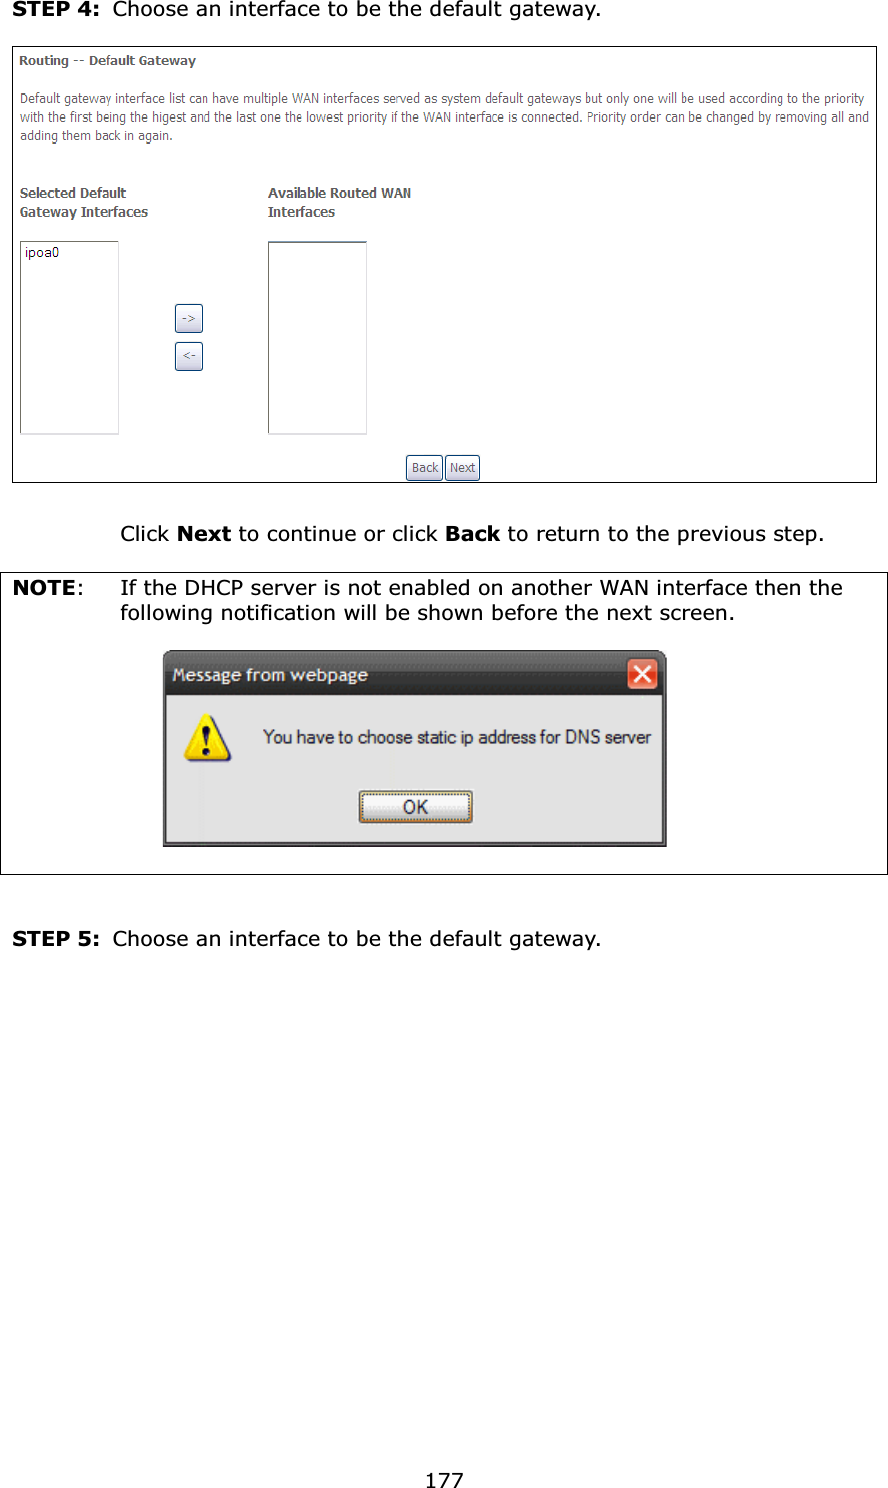  177STEP 4:  Choose an interface to be the default gateway.     Click Next to continue or click Back to return to the previous step.  NOTE:  If the DHCP server is not enabled on another WAN interface then the following notification will be shown before the next screen.          STEP 5:  Choose an interface to be the default gateway. 